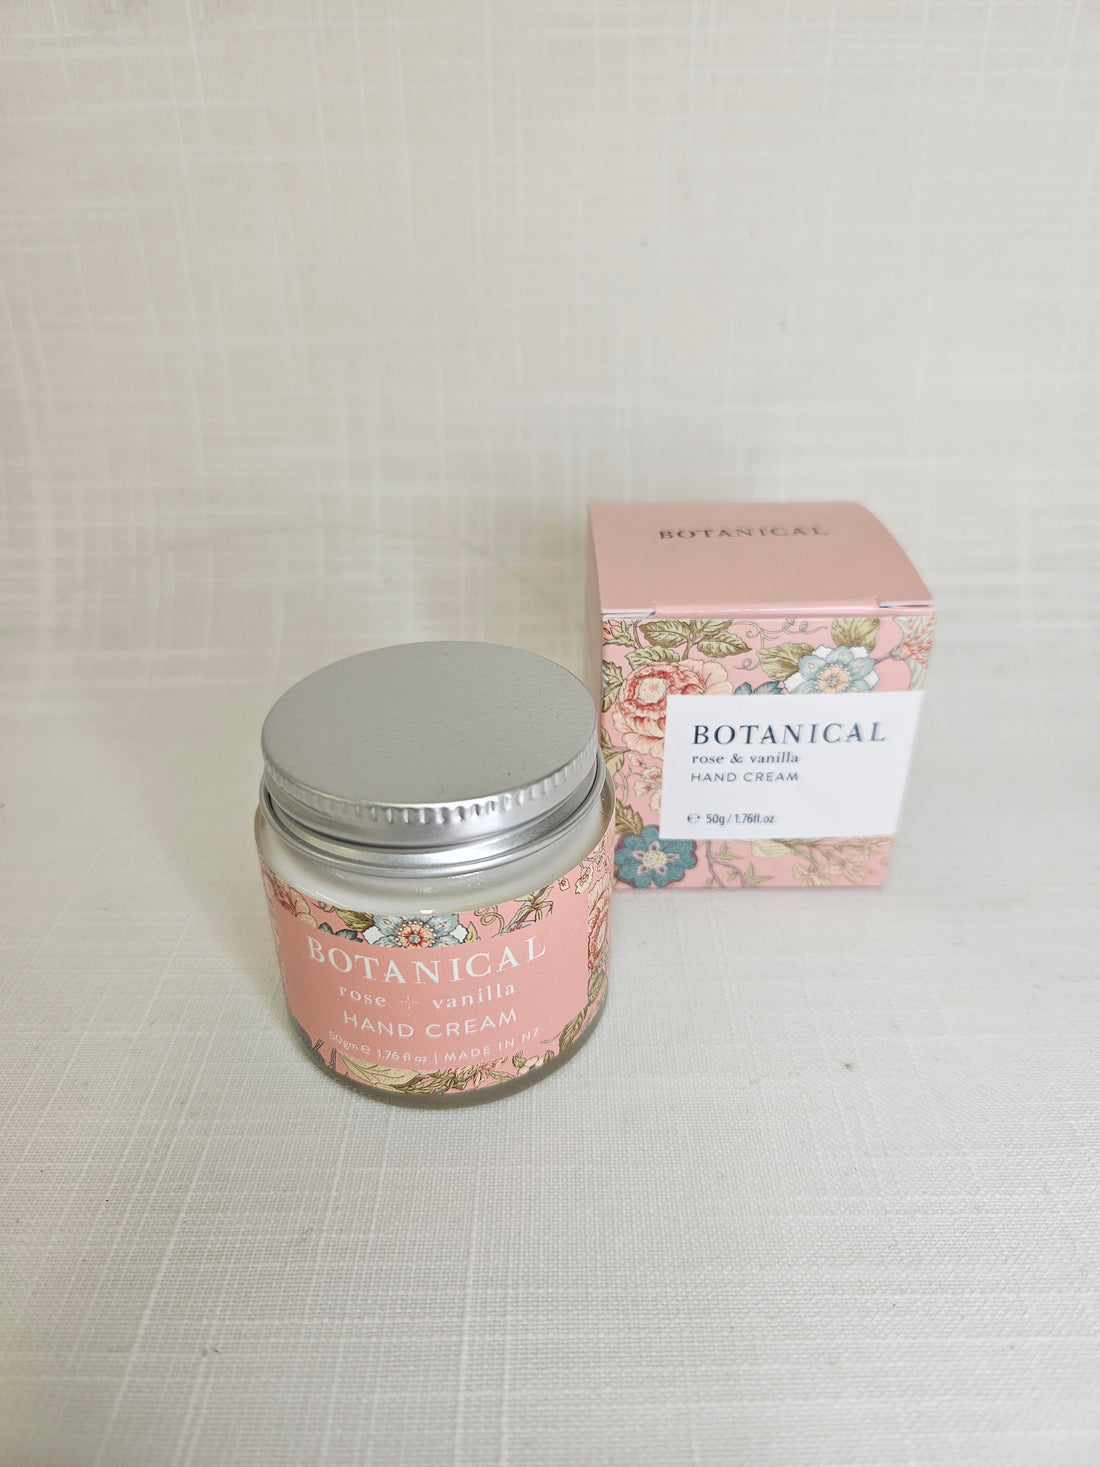 A jar of the Botanical Rose &amp; Vanilla handcream with a pink floral label stands next to a matching box.